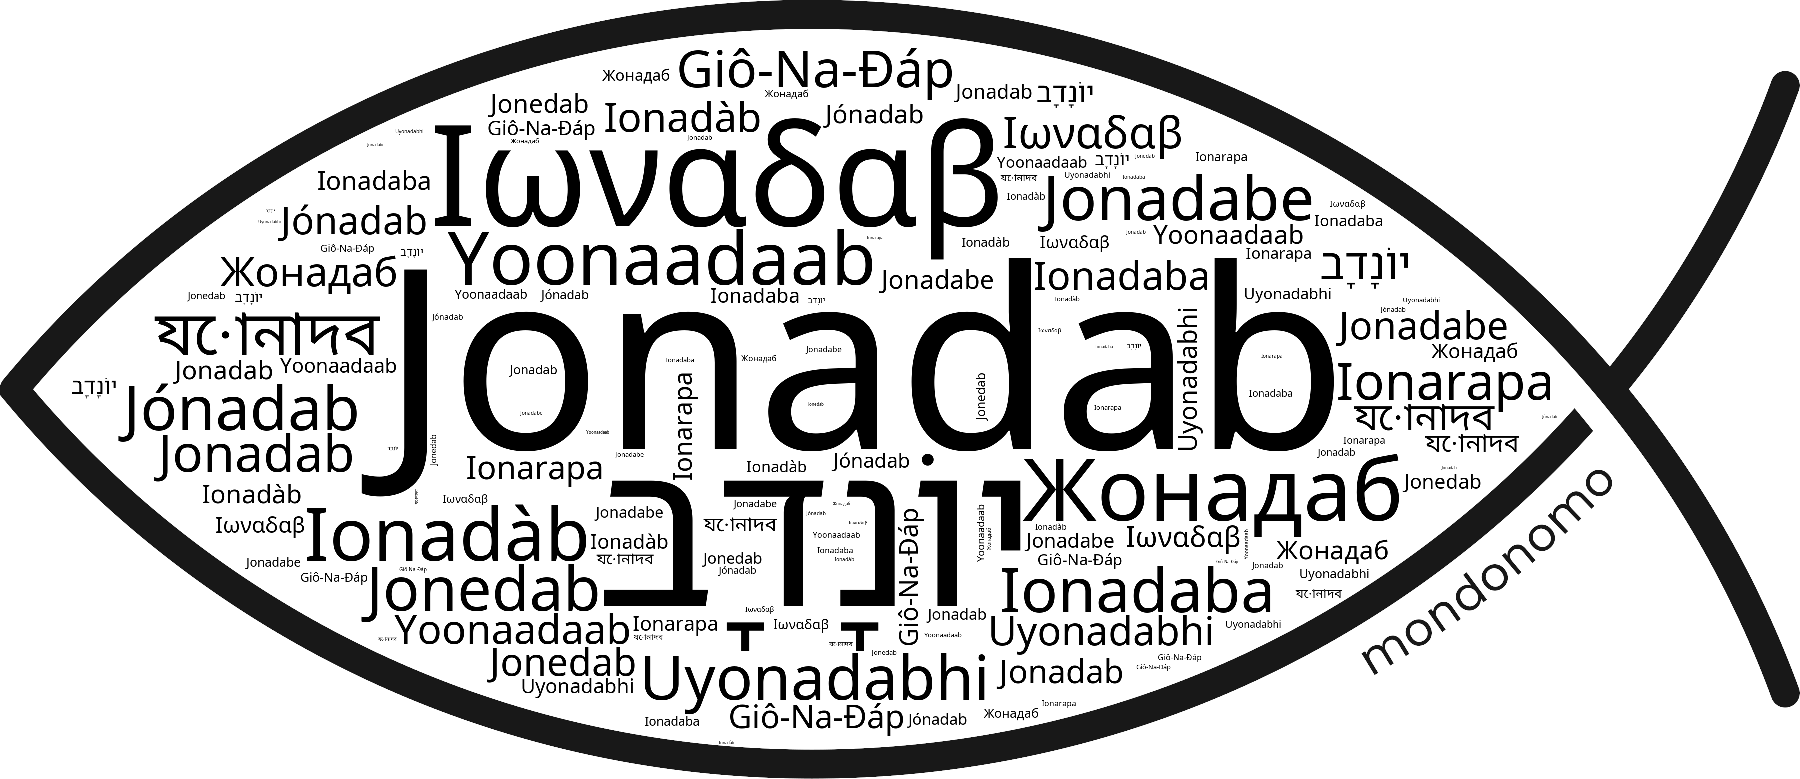 Name Jonadab in the world's Bibles